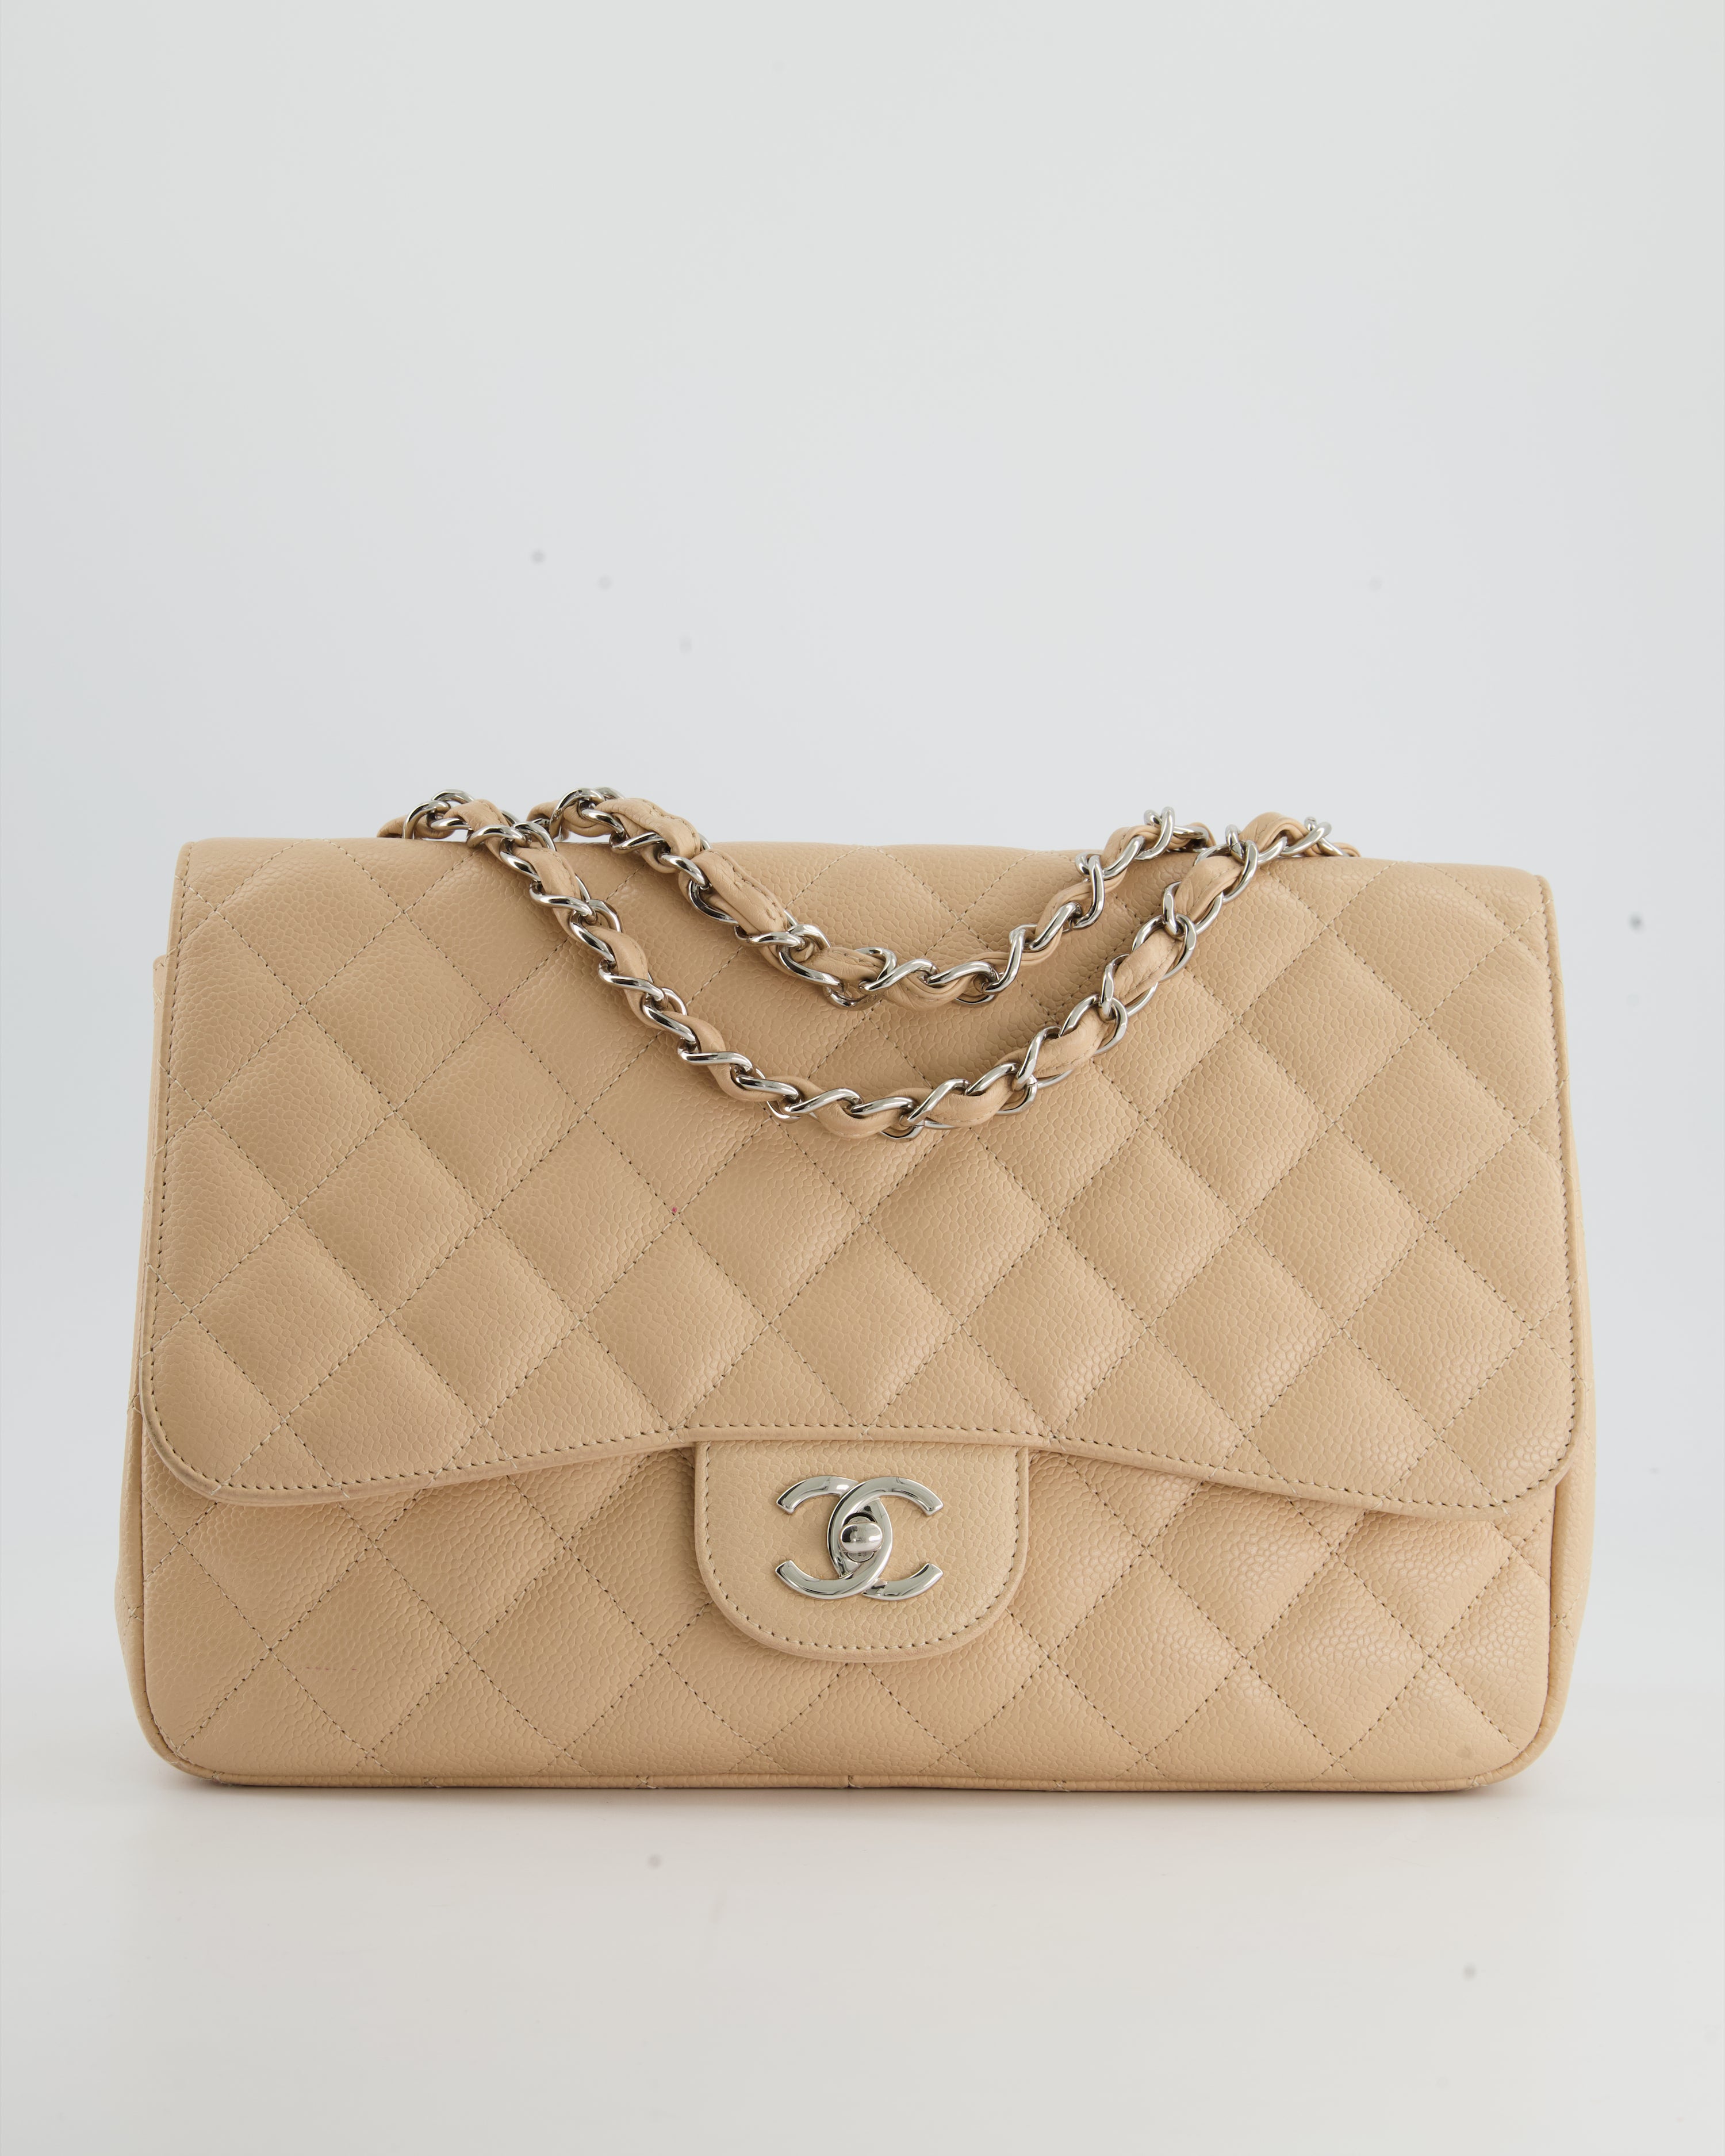 Chanel Classic Stitched CC Bowler Beige Caviar Quilted Leather Satchel Bag